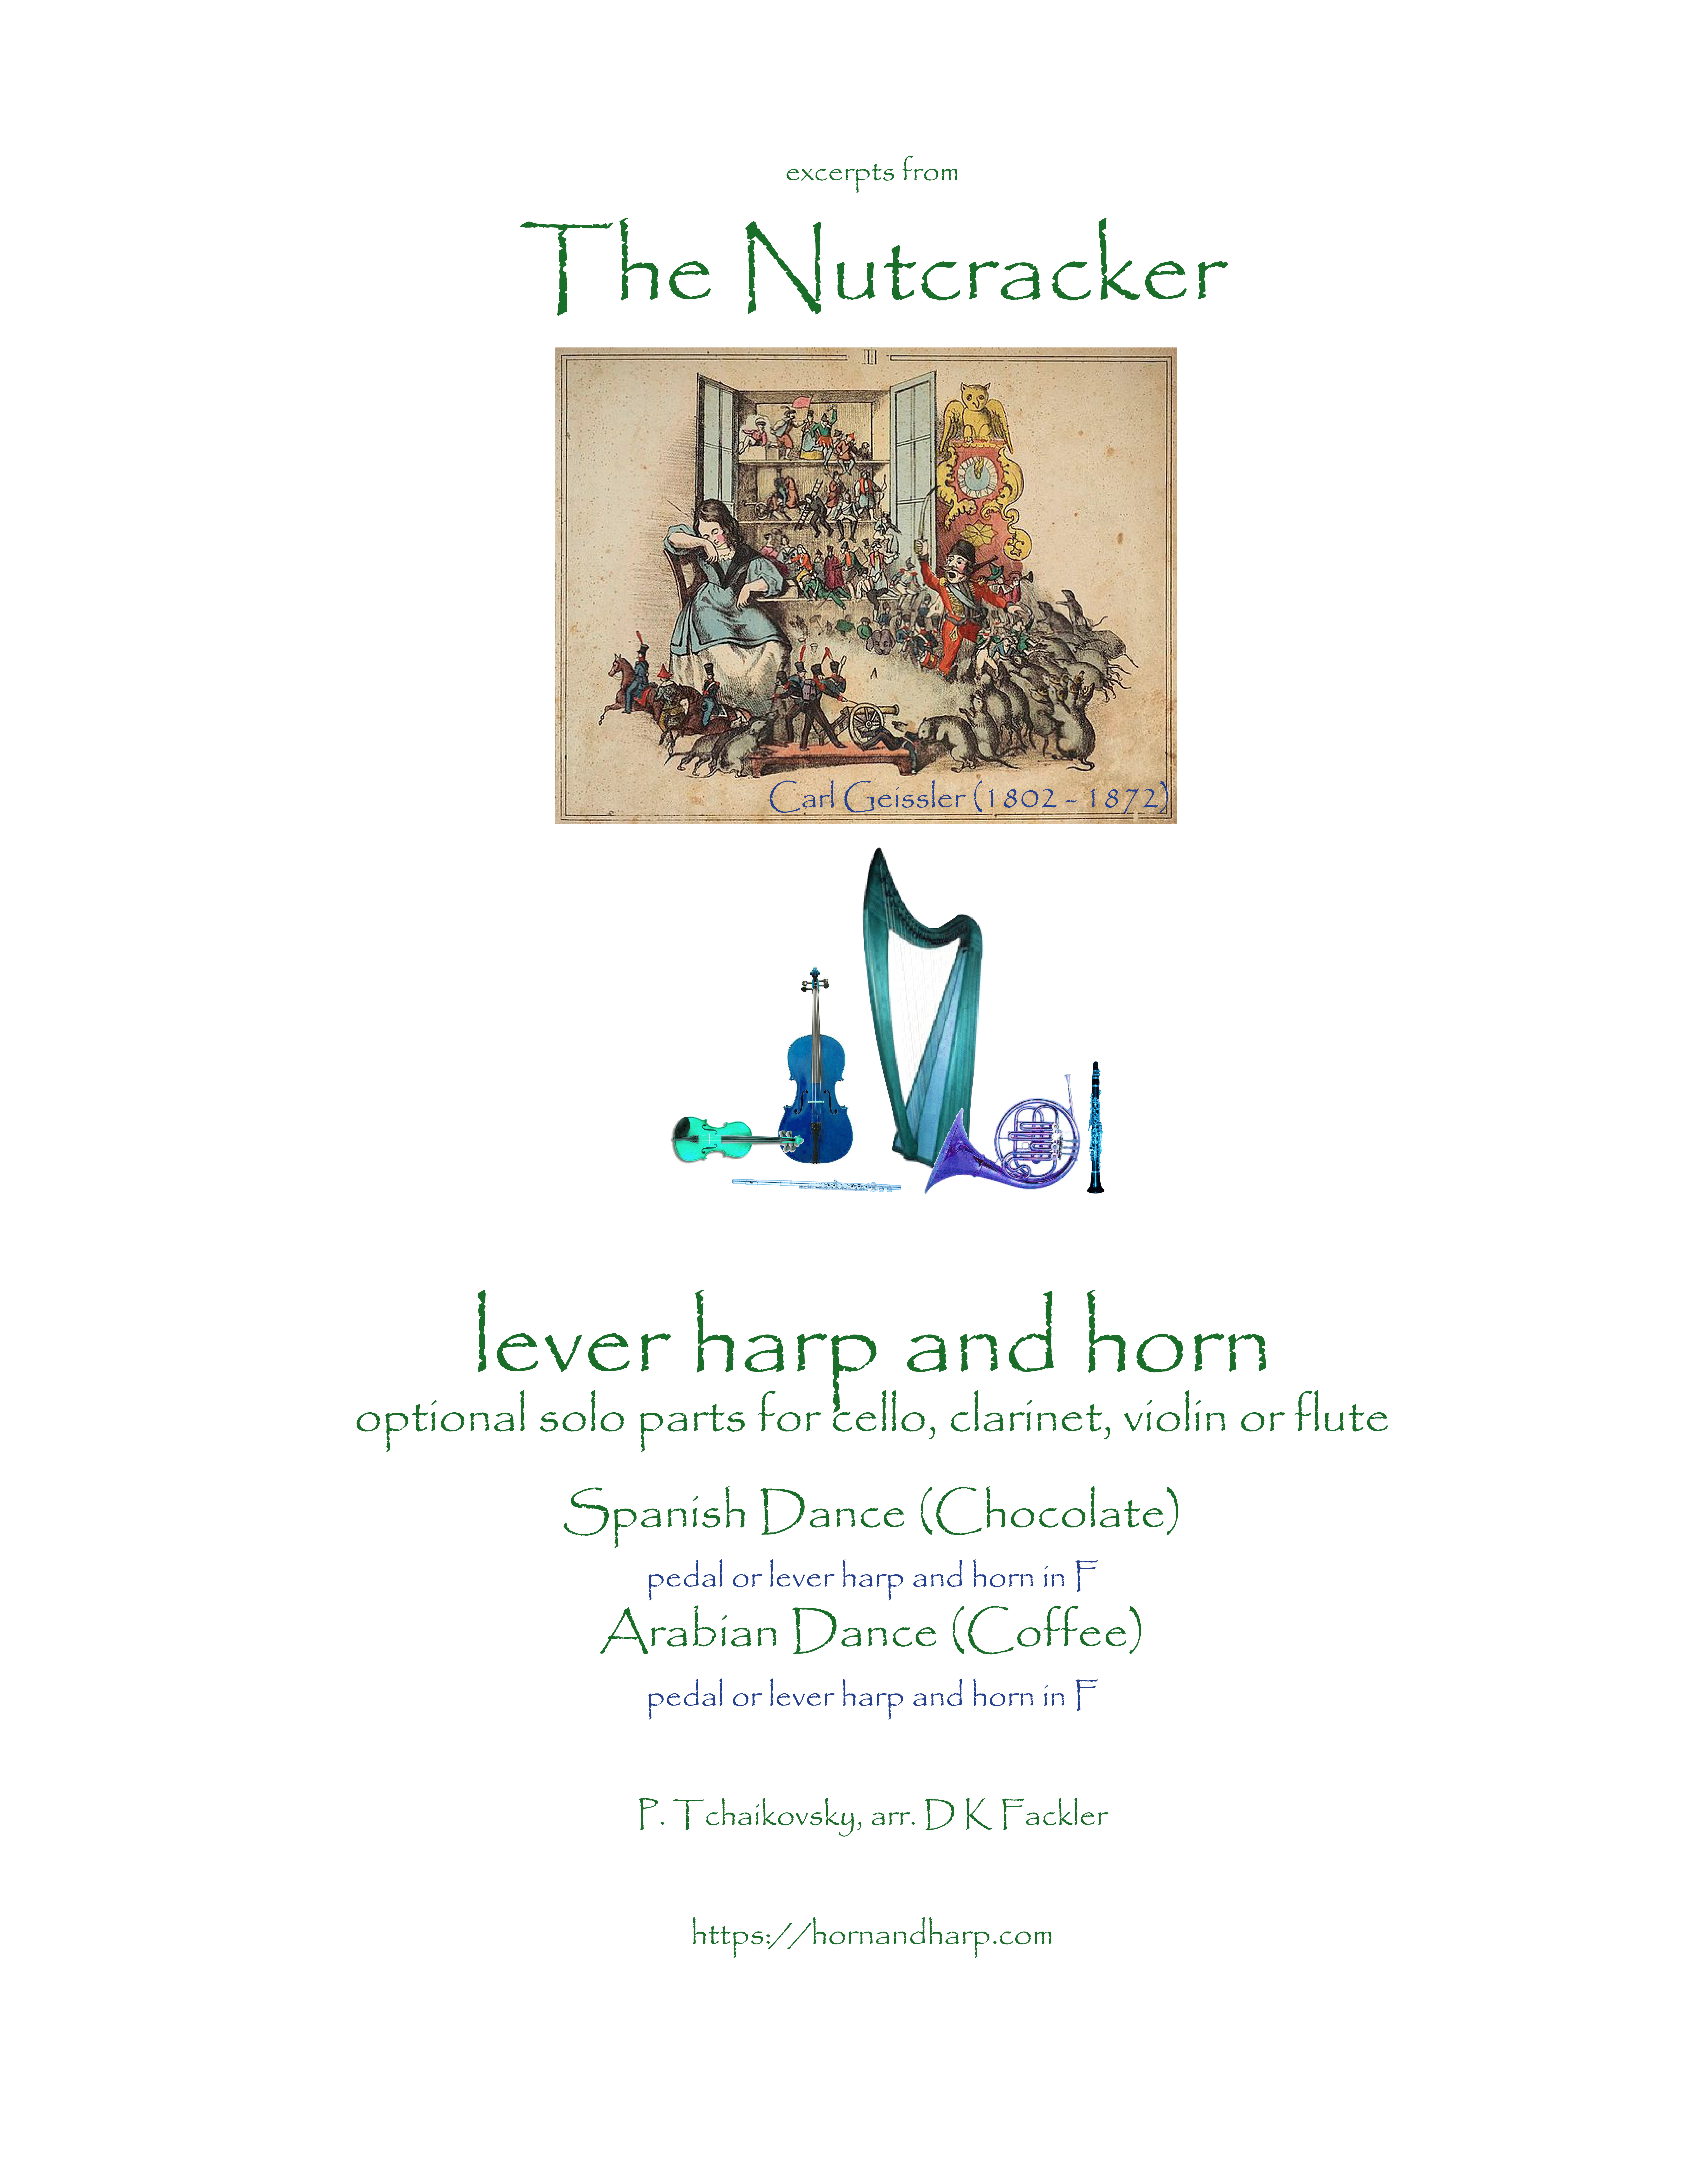 French horn sheet music - Nutcracker excerpts for horn in F and lever harp performance, sheet music